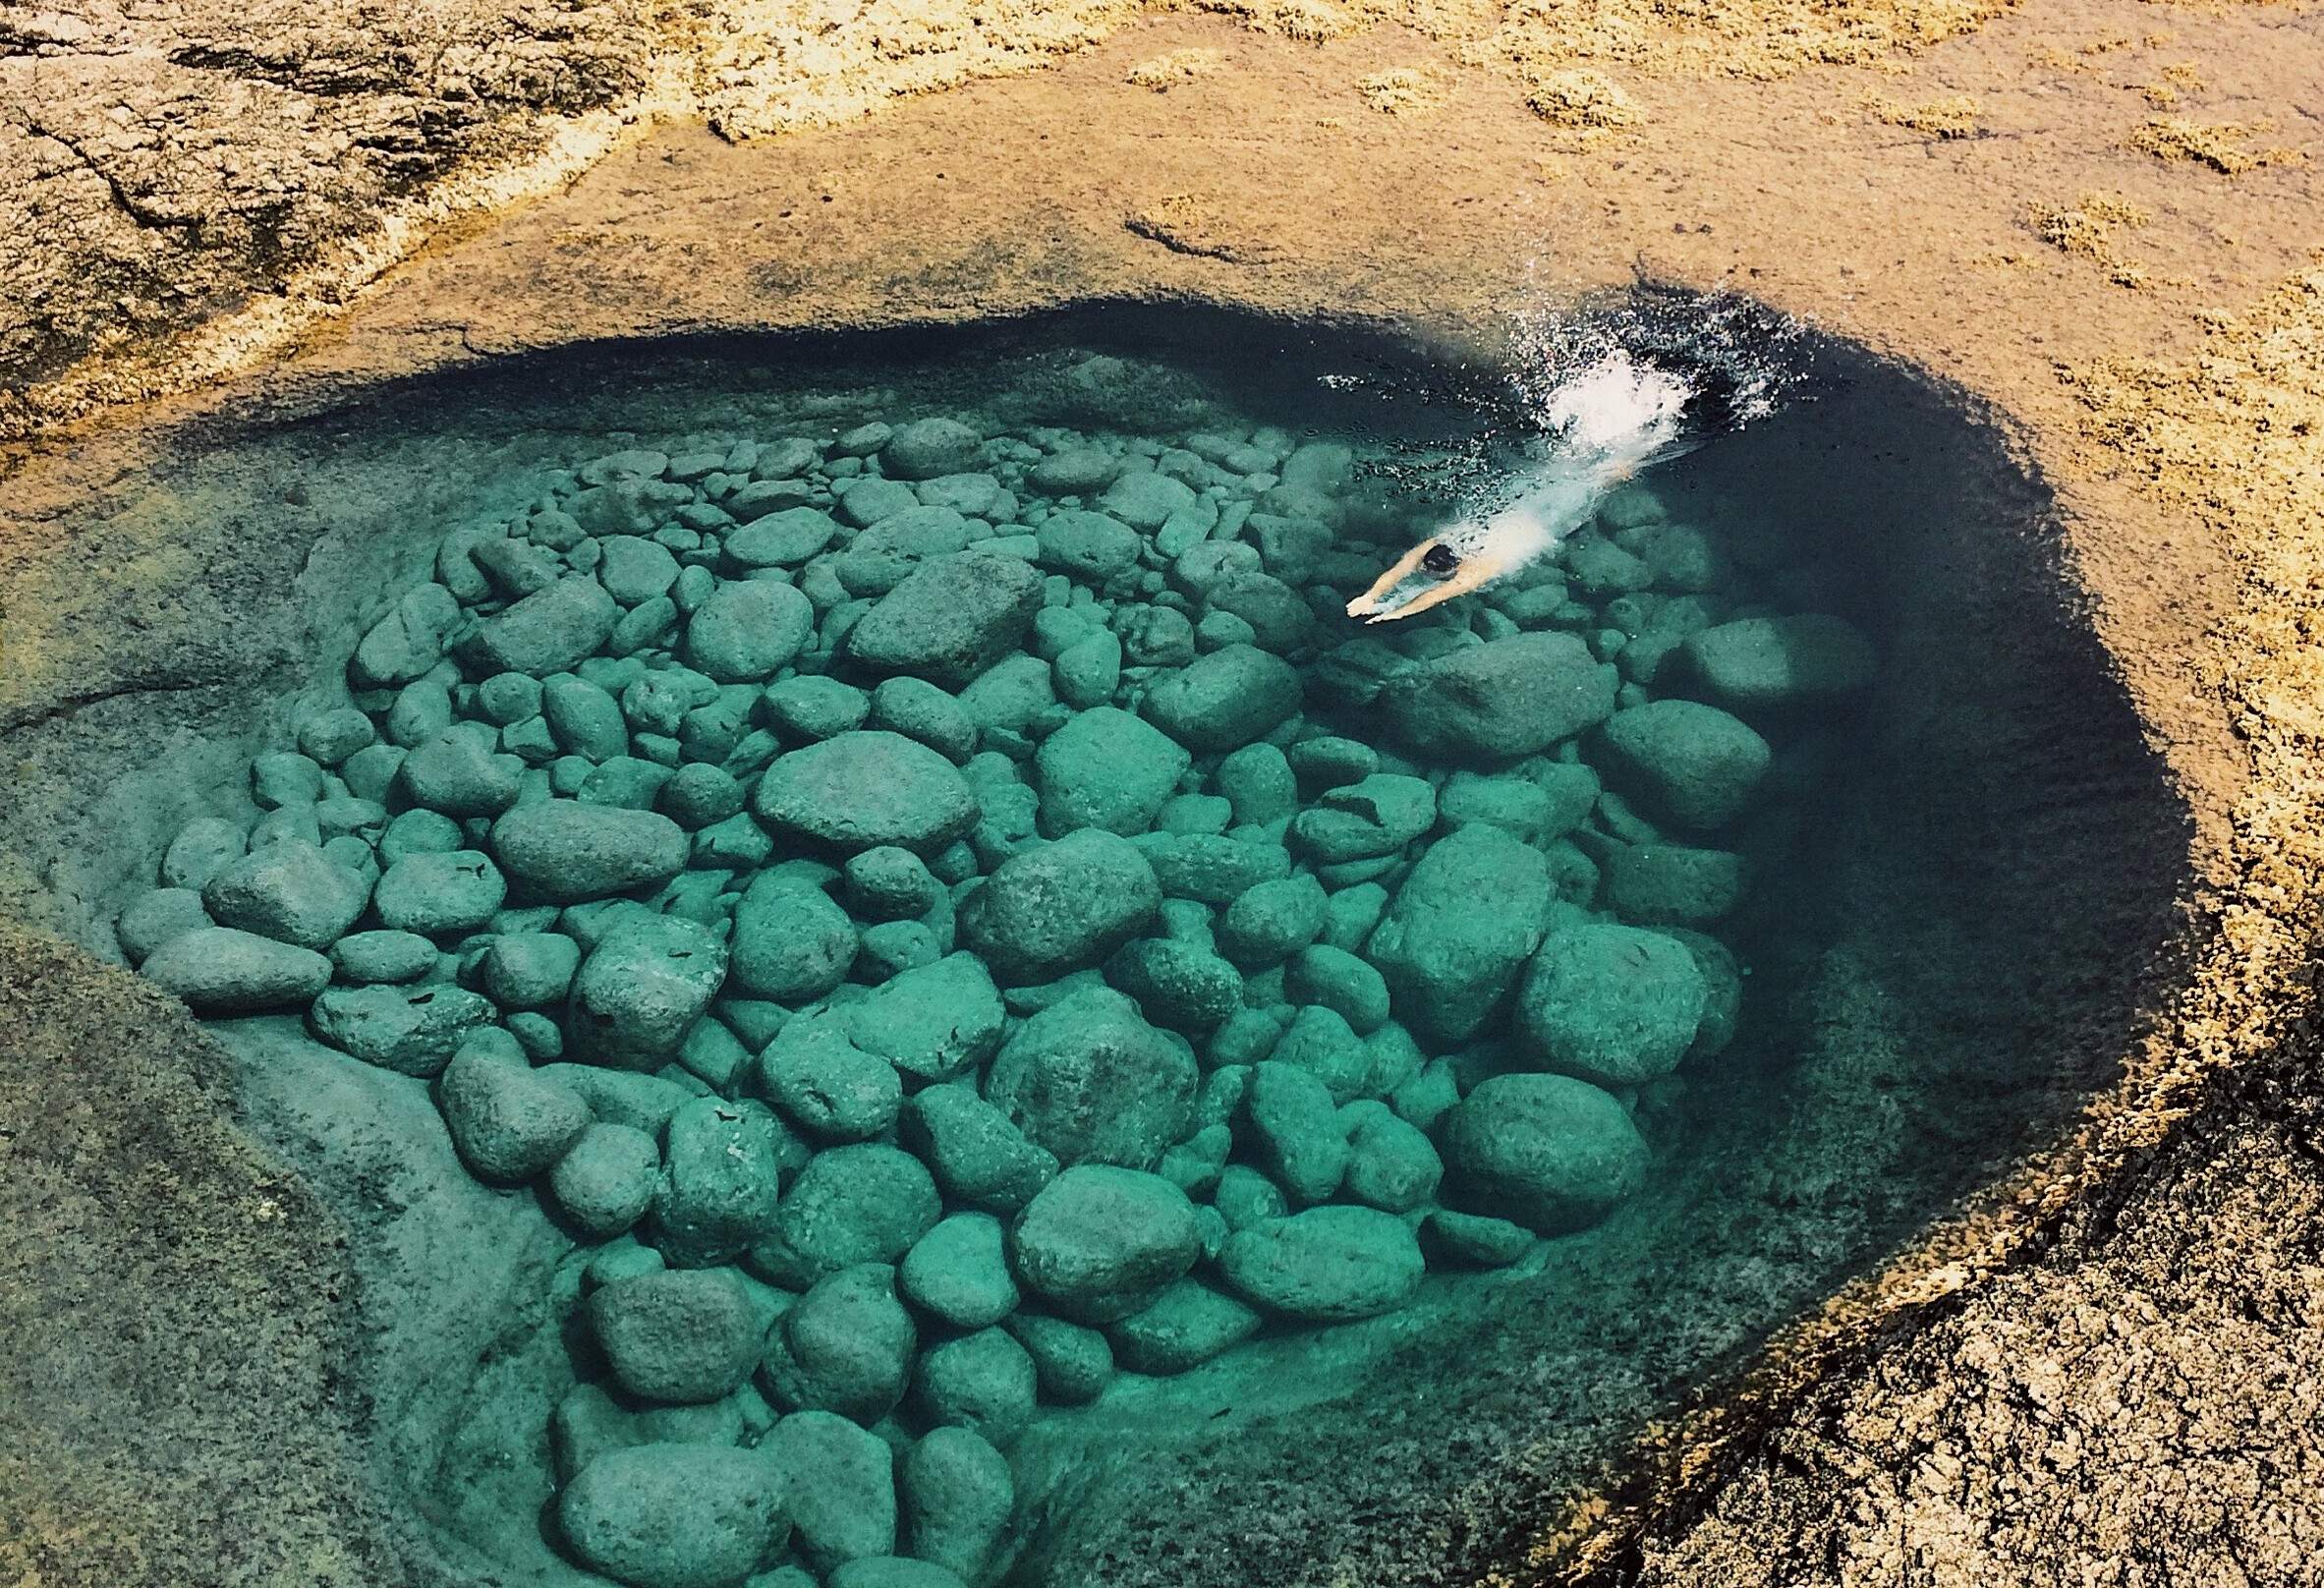 A man dives into a natural rock pool with crystalline green colour water.